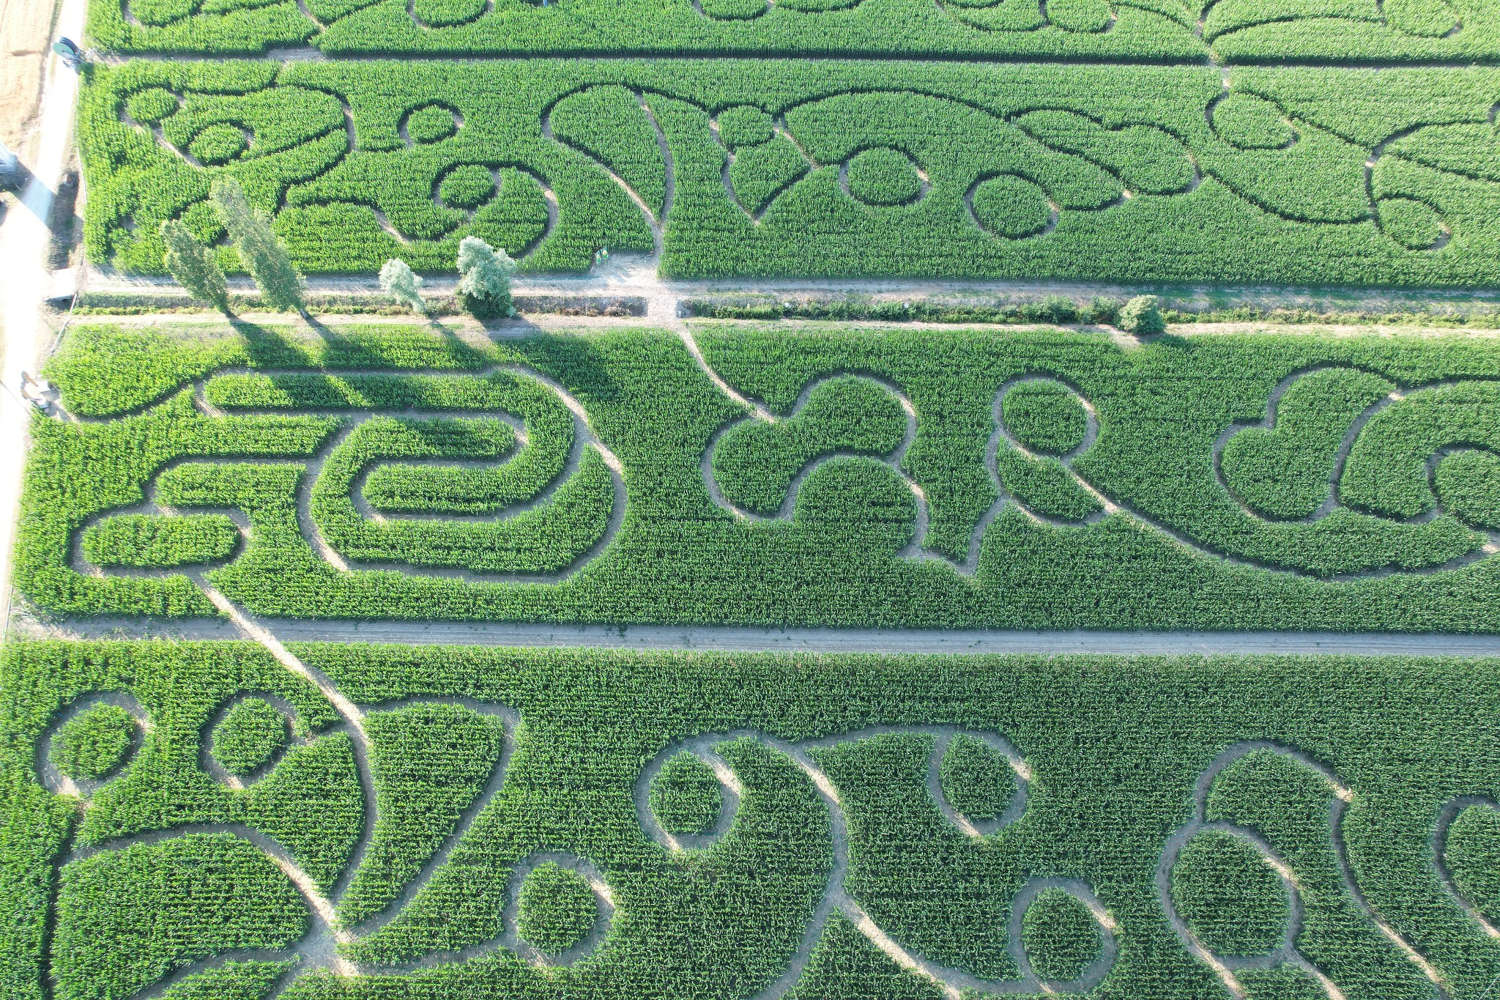 The Labyrinth of Hort of 2020